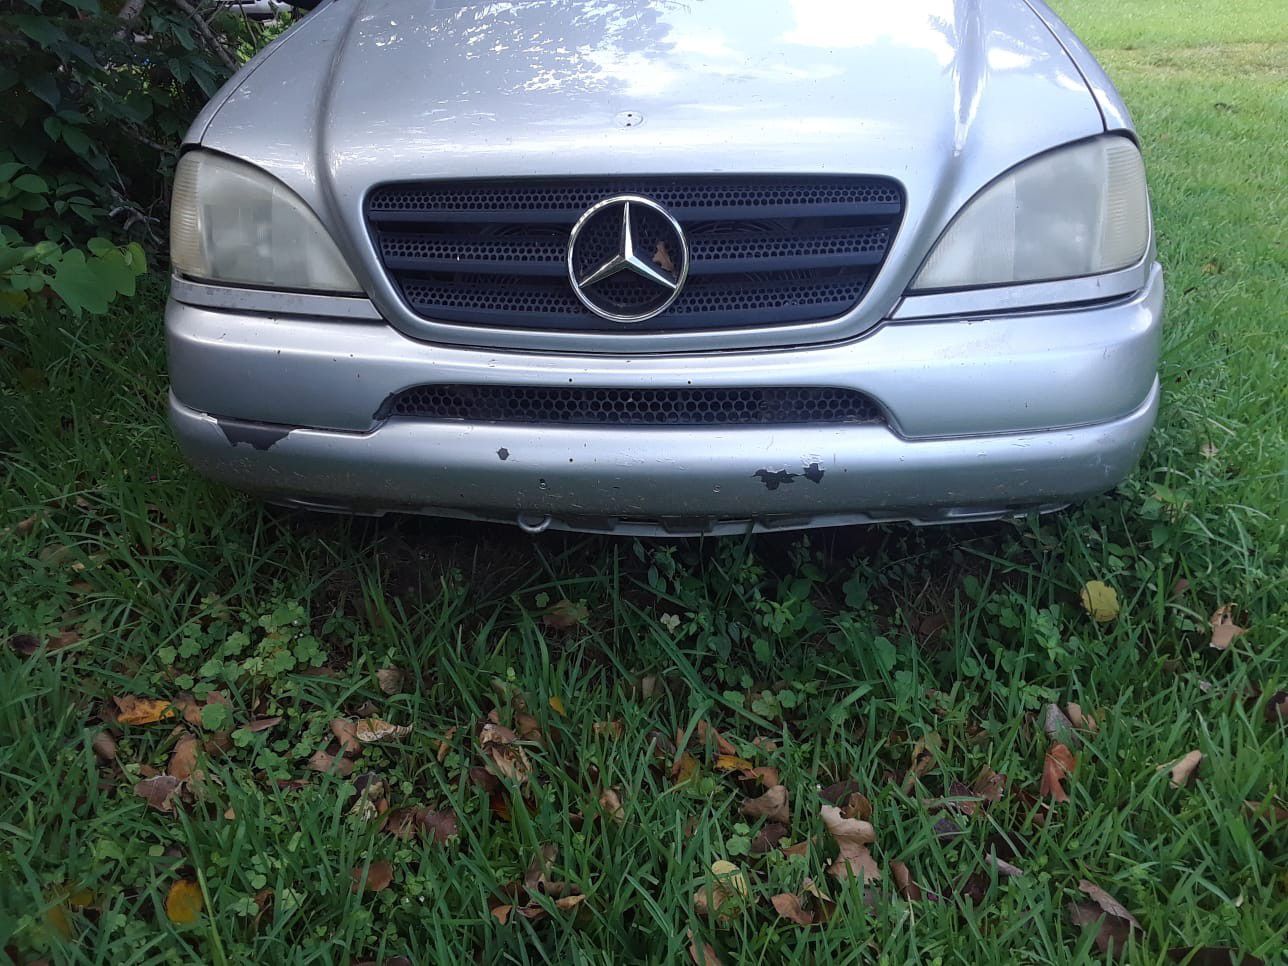 Mercedes Benz ml 2001 full parts out